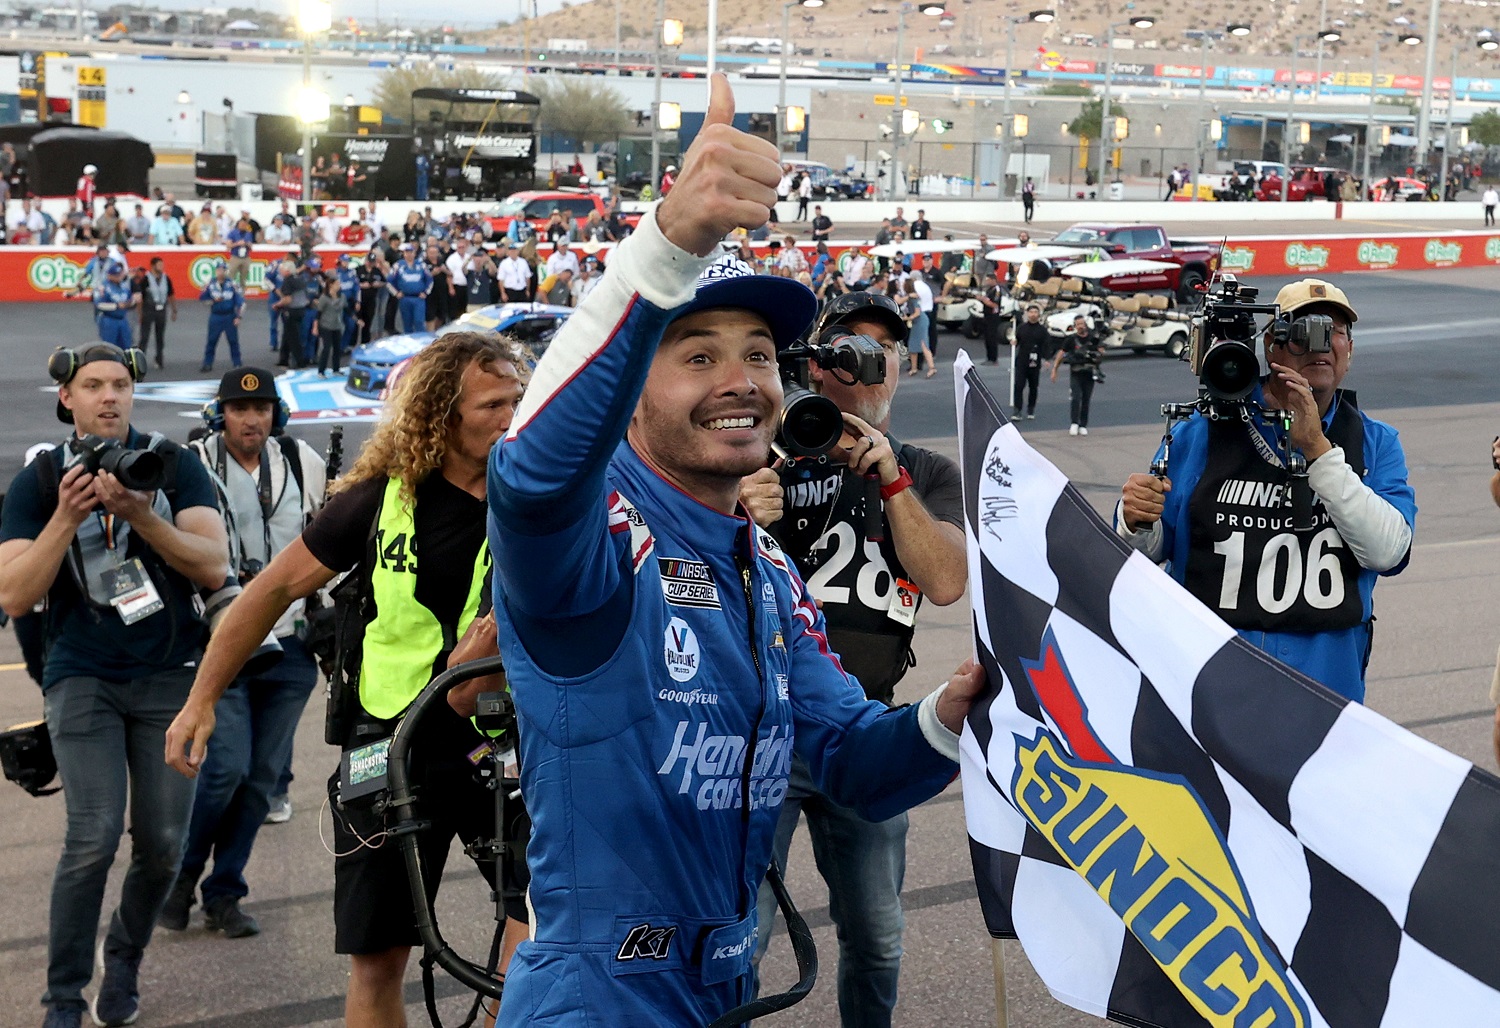 Kyle Larson, driver of the No. 5 Chevrolet, celebrates after winning the NASCAR Cup Series Championship at Phoenix Raceway on Nov. 7, 2021.